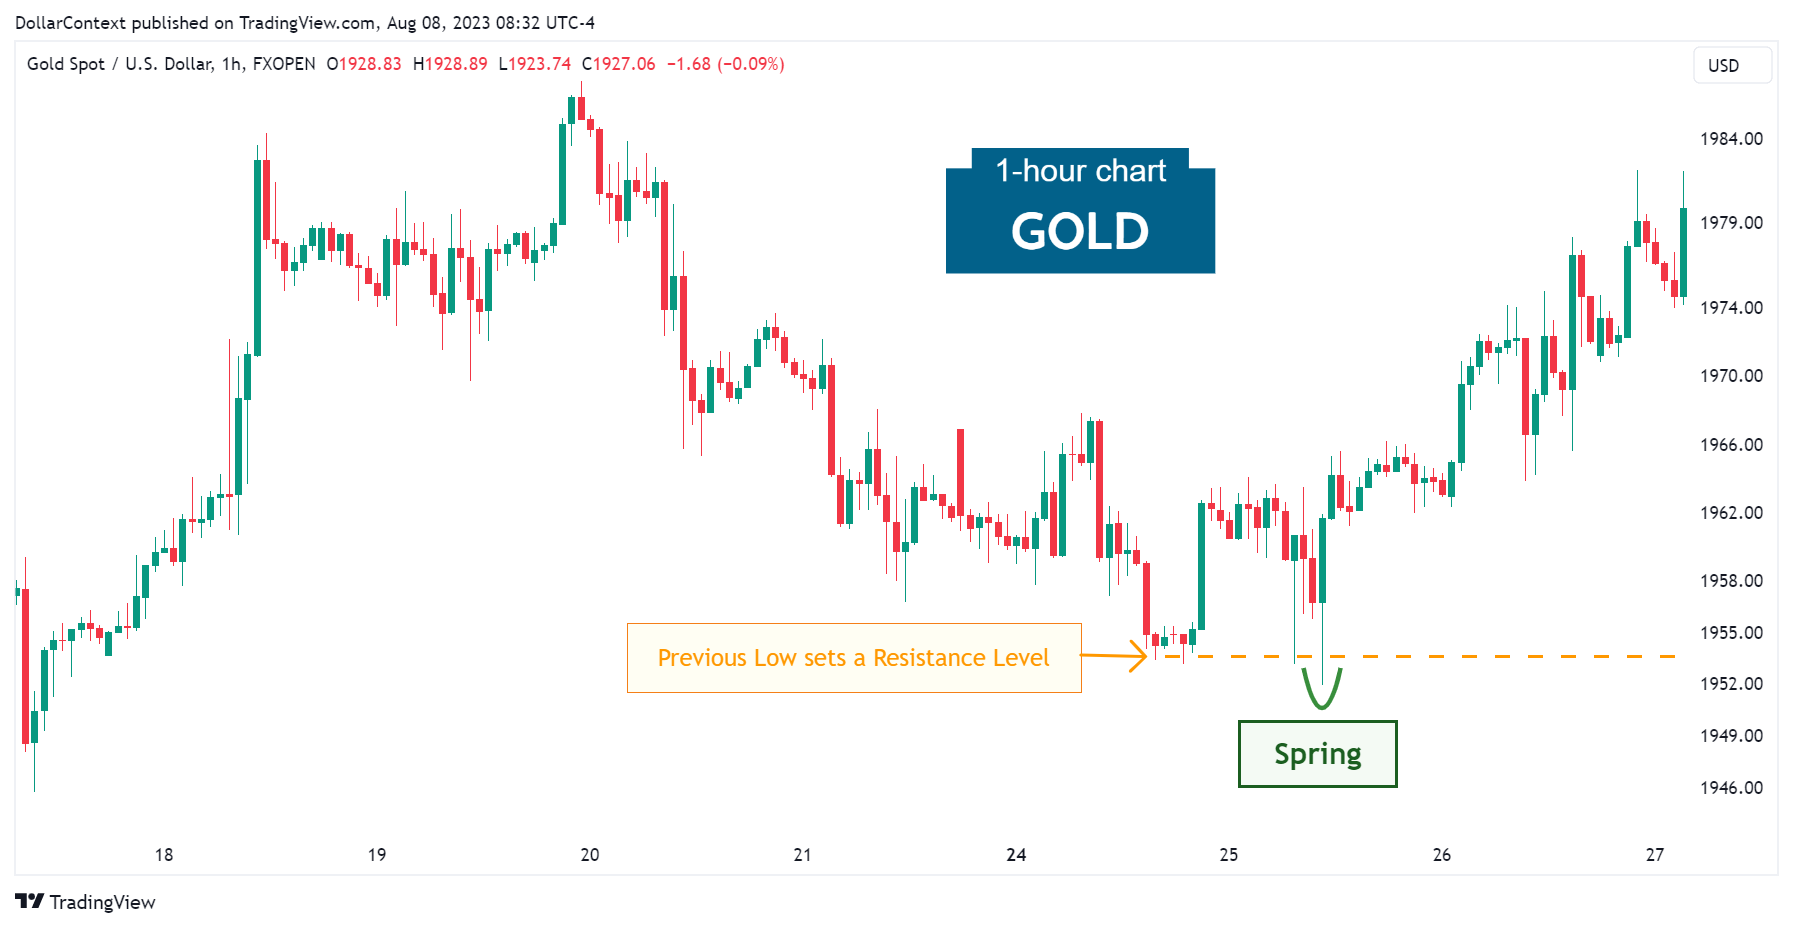 Gold Spot: Spring After Breaching a Support Level. July 2022 (Hourly Chart)